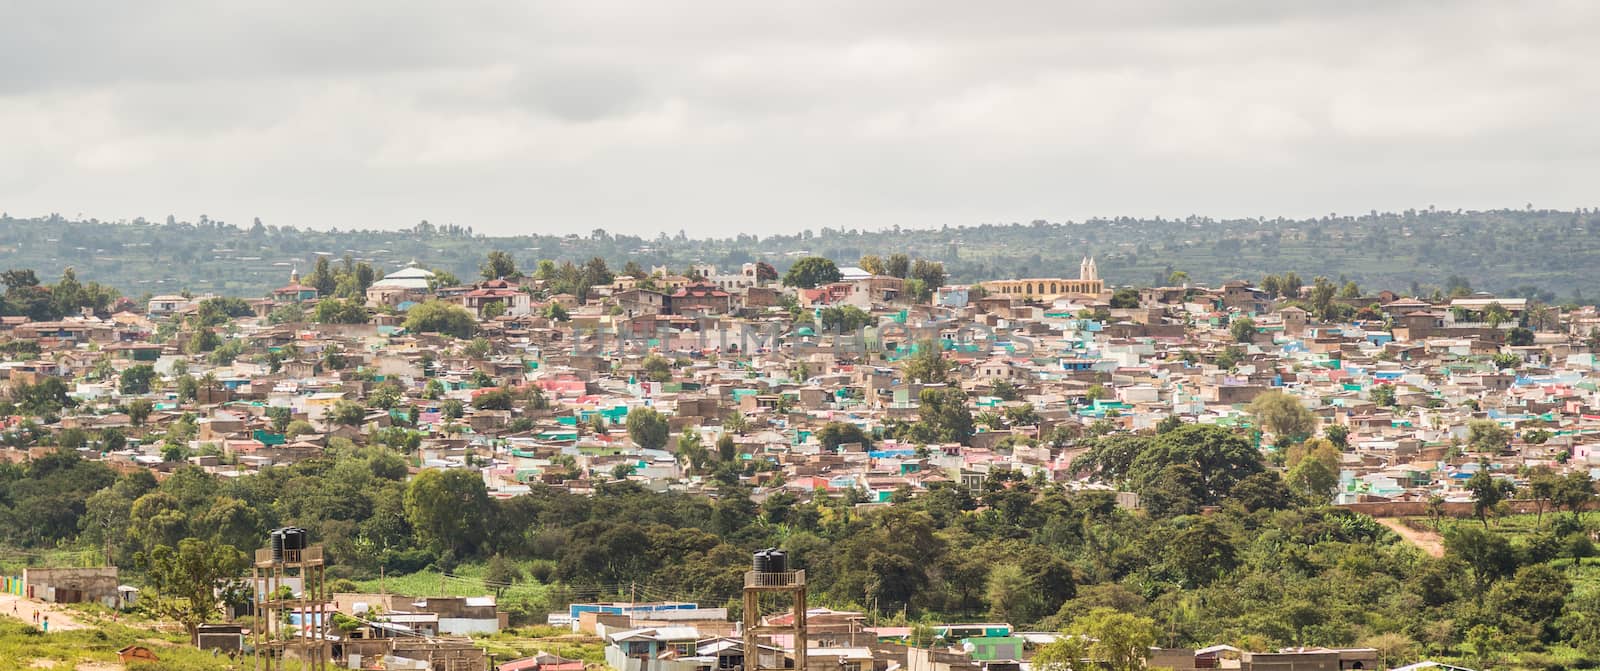 Aerial view of the city of Harar, Ethiopia, with the fortified historic walled city Jegol in the center